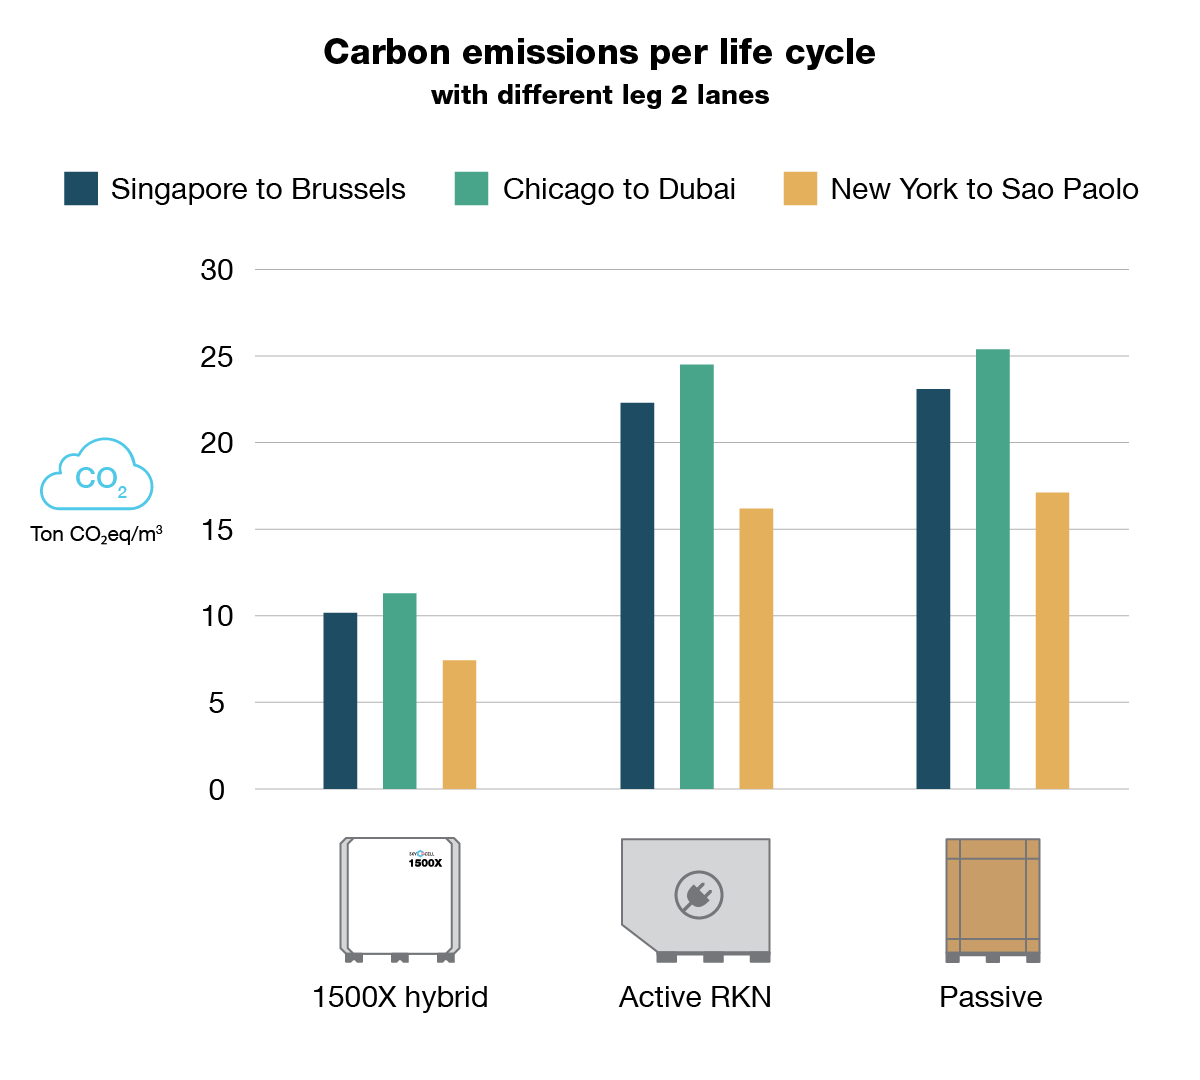 Graph comparing carbon emissions per life cycle or hybrid, active and passive containers over three lanes